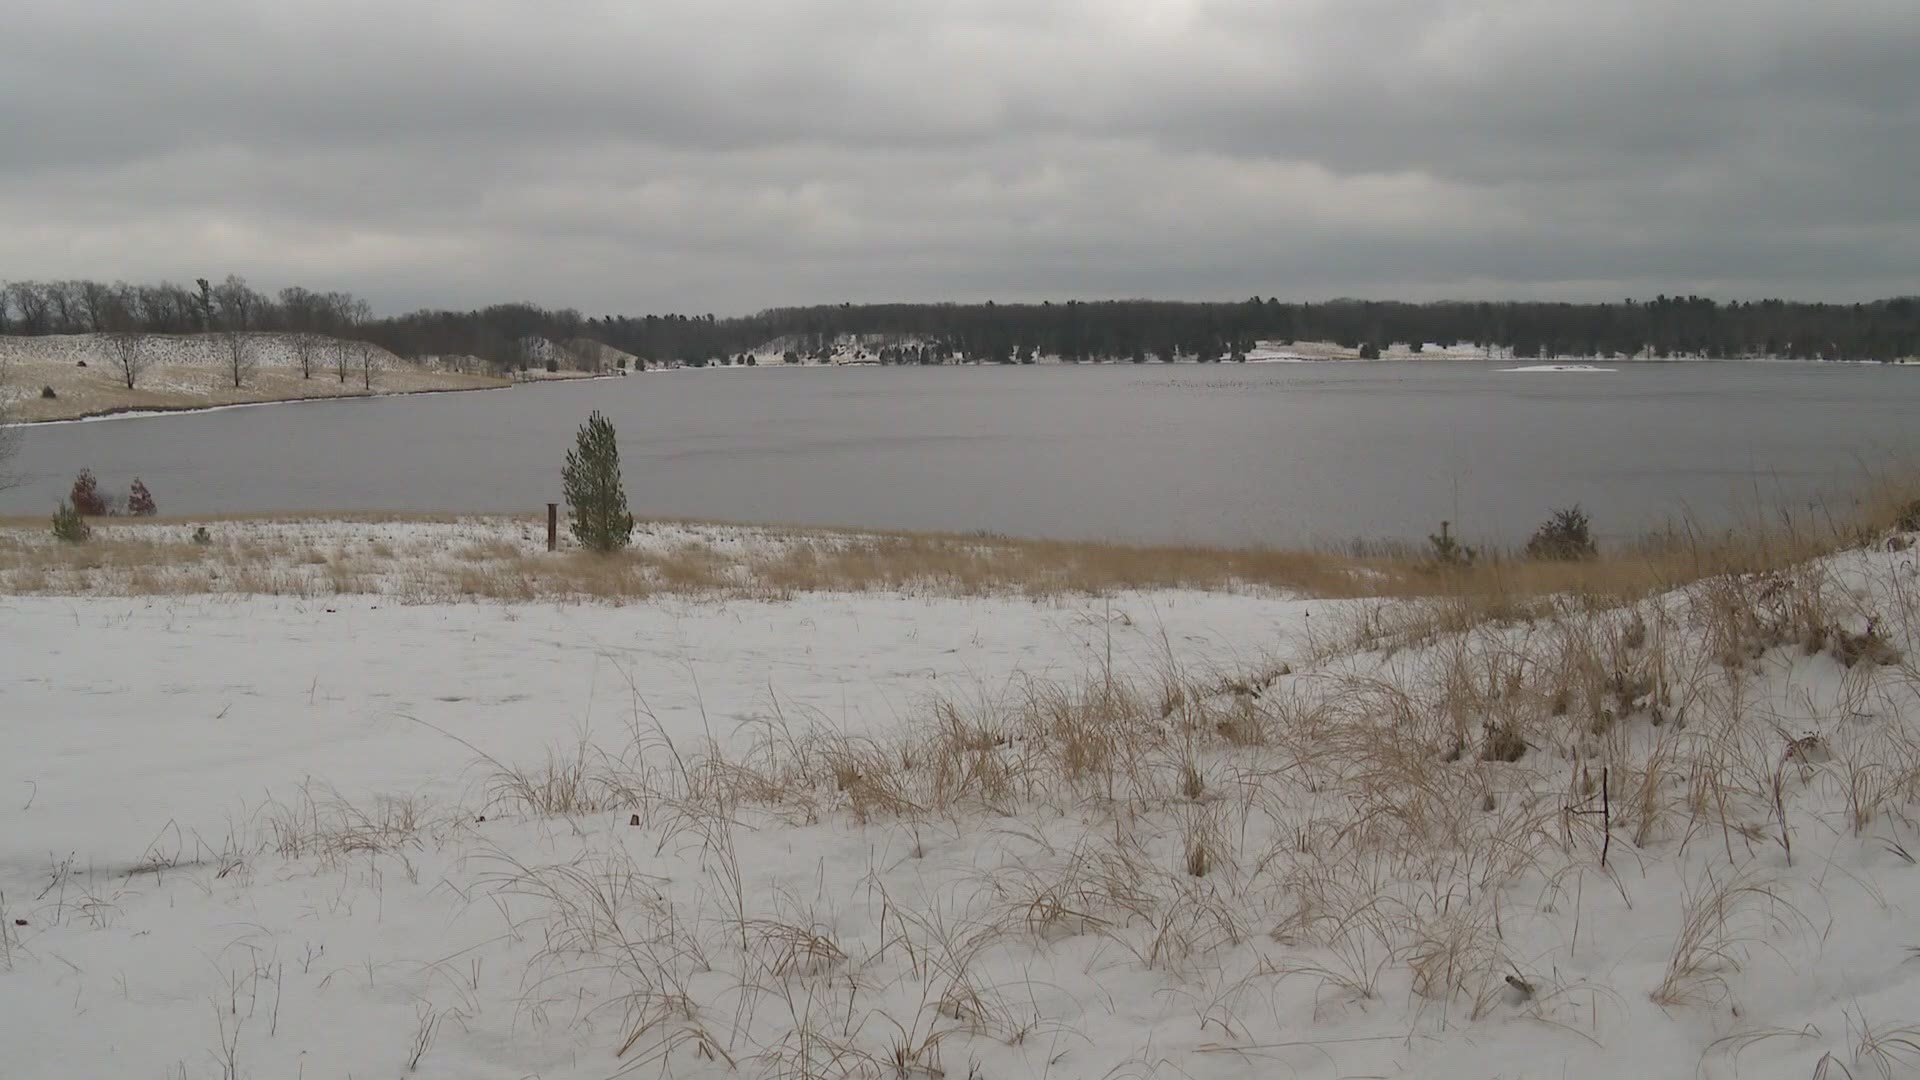 The Nugent Sand mining property in Norton Shores is 214-acres including a long stretch of Lake Michigan shoreline.